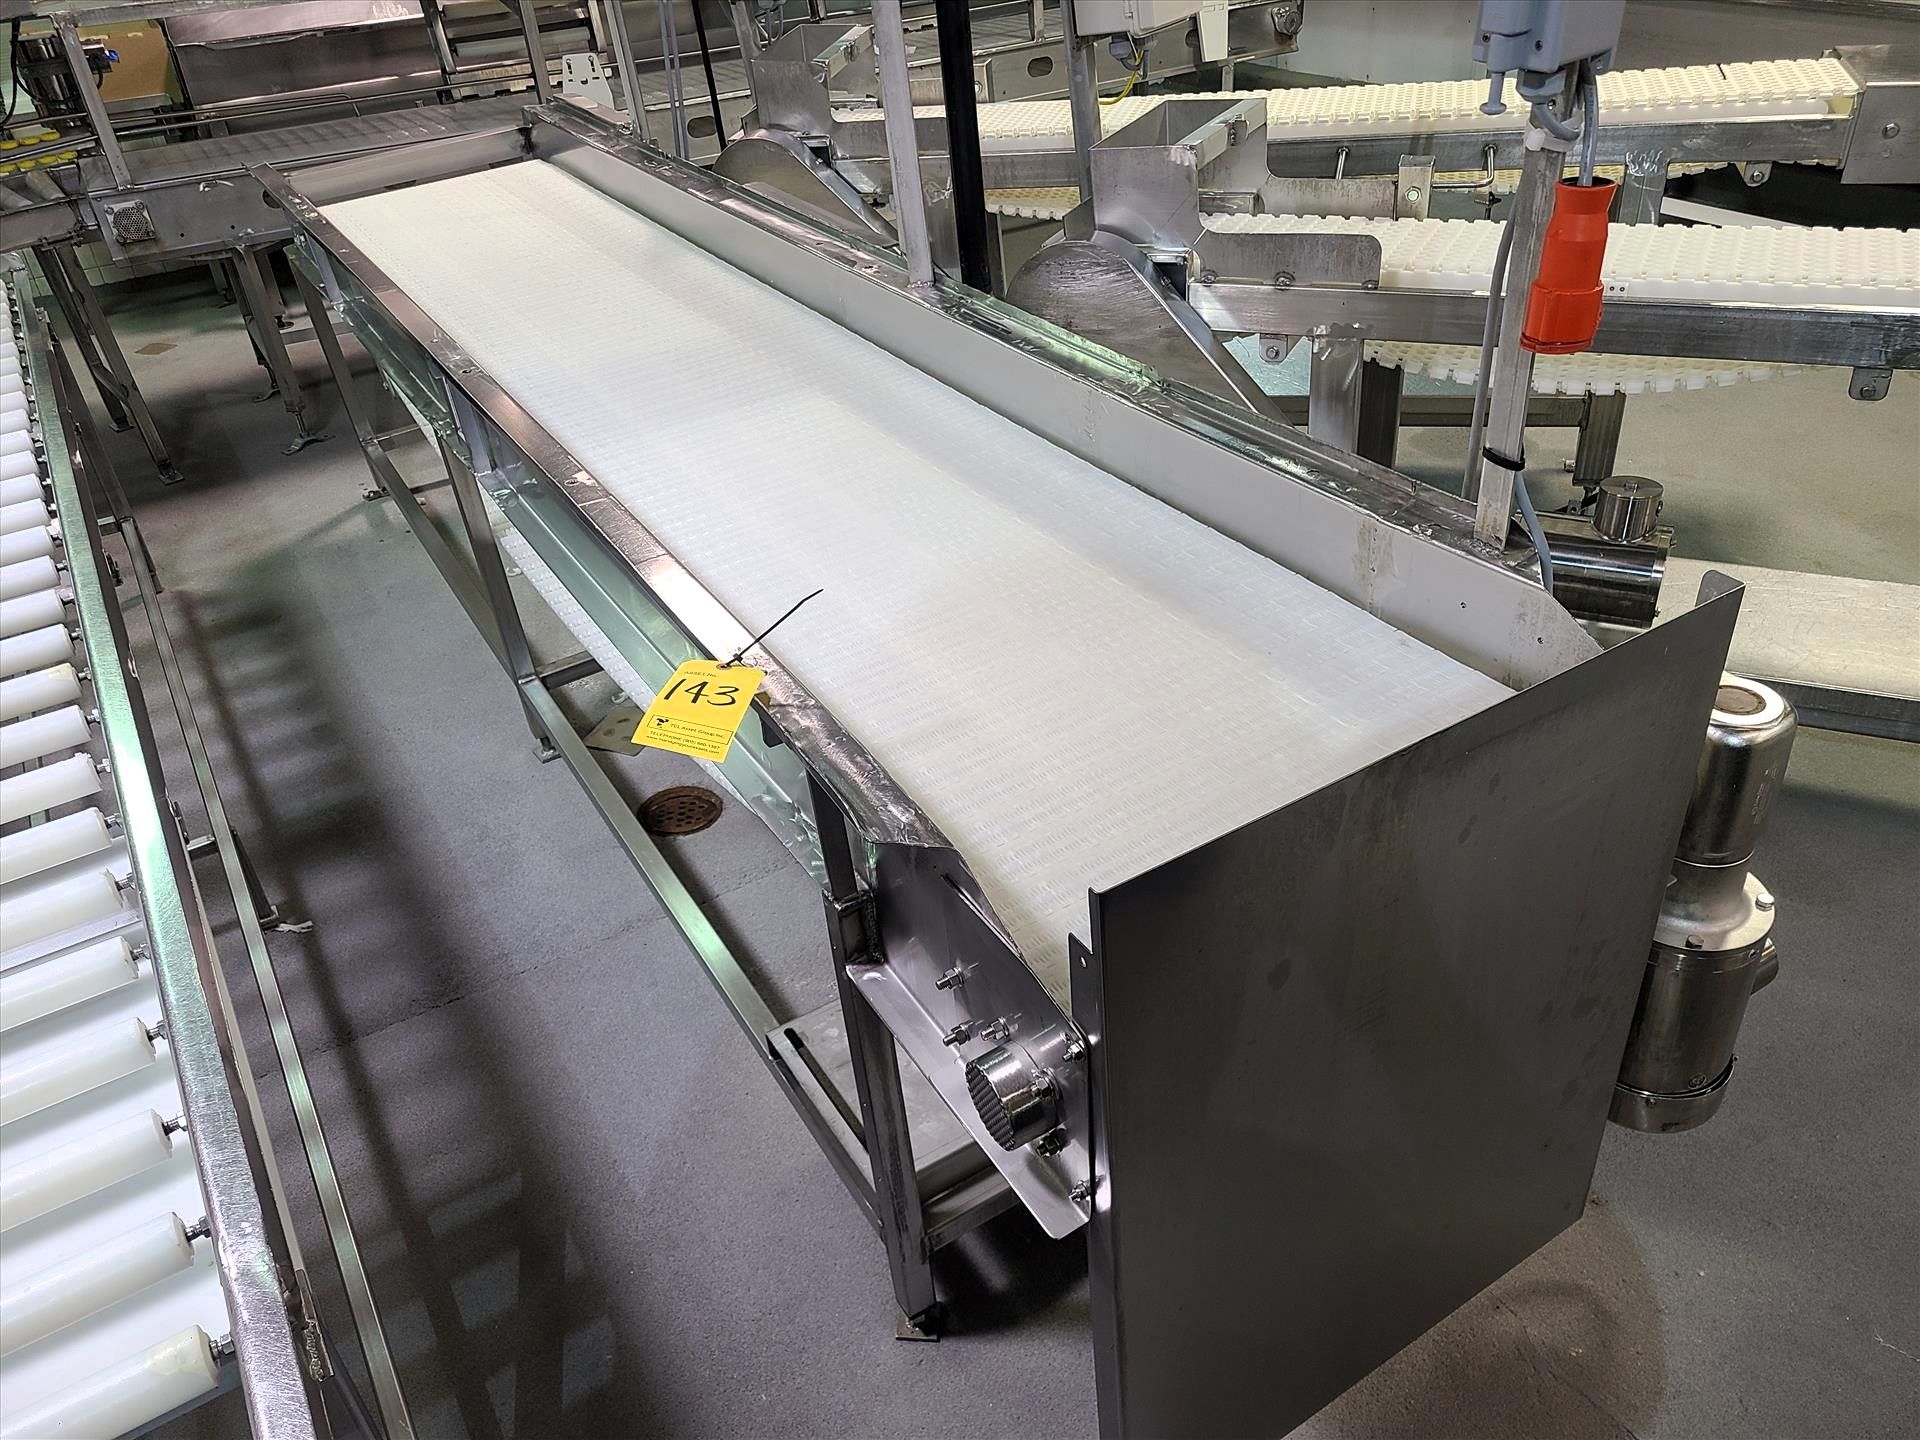 belt conveyor, approx. 24 in. x 11 ft., 0.75 hp wash-down motor, stainless steel [Loc. Whole Bird]